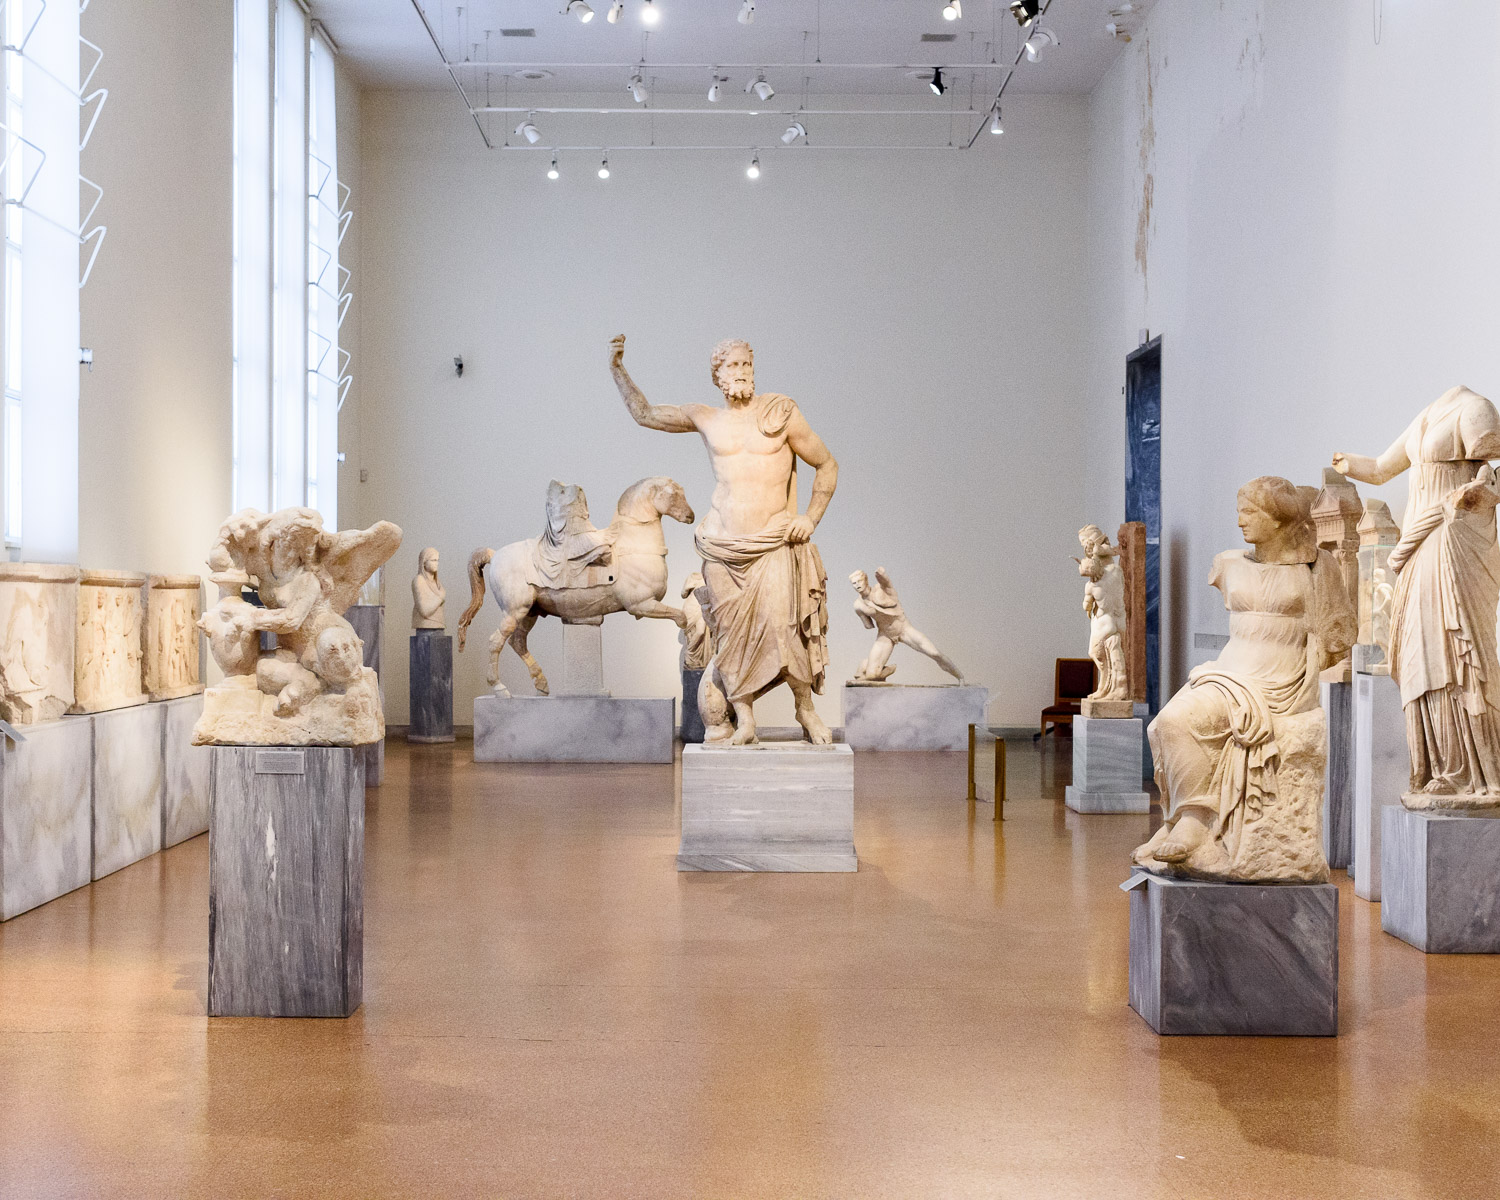  The National Archeolgical Museum of Athens, founded in 1829 